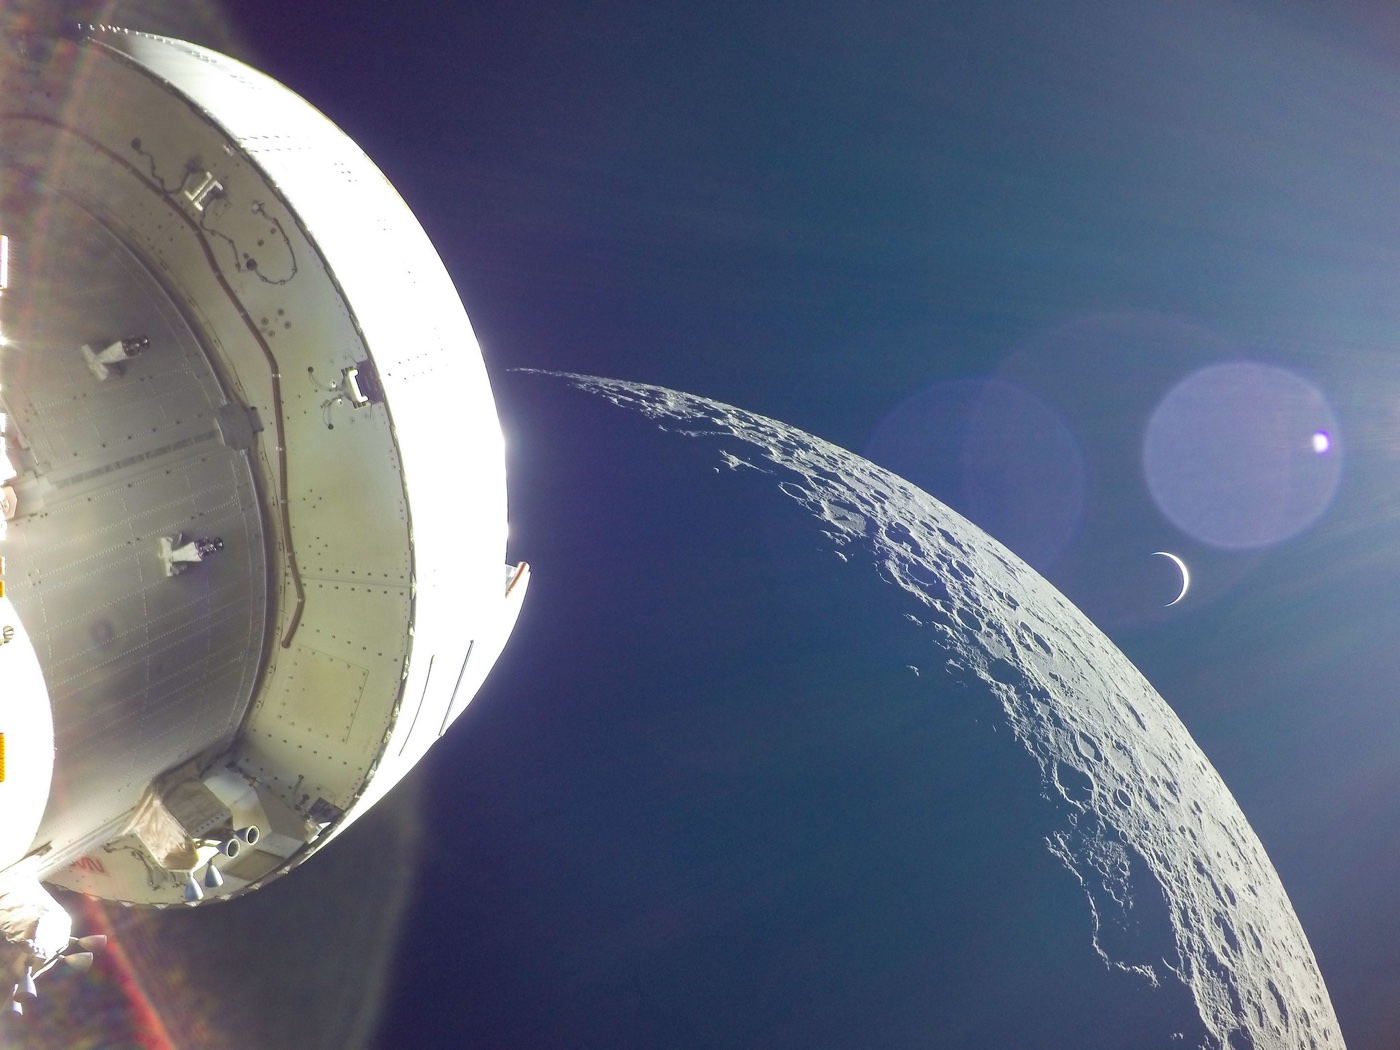 photo of the Moon and Earth with the Artemis I spacecraft in the foreground